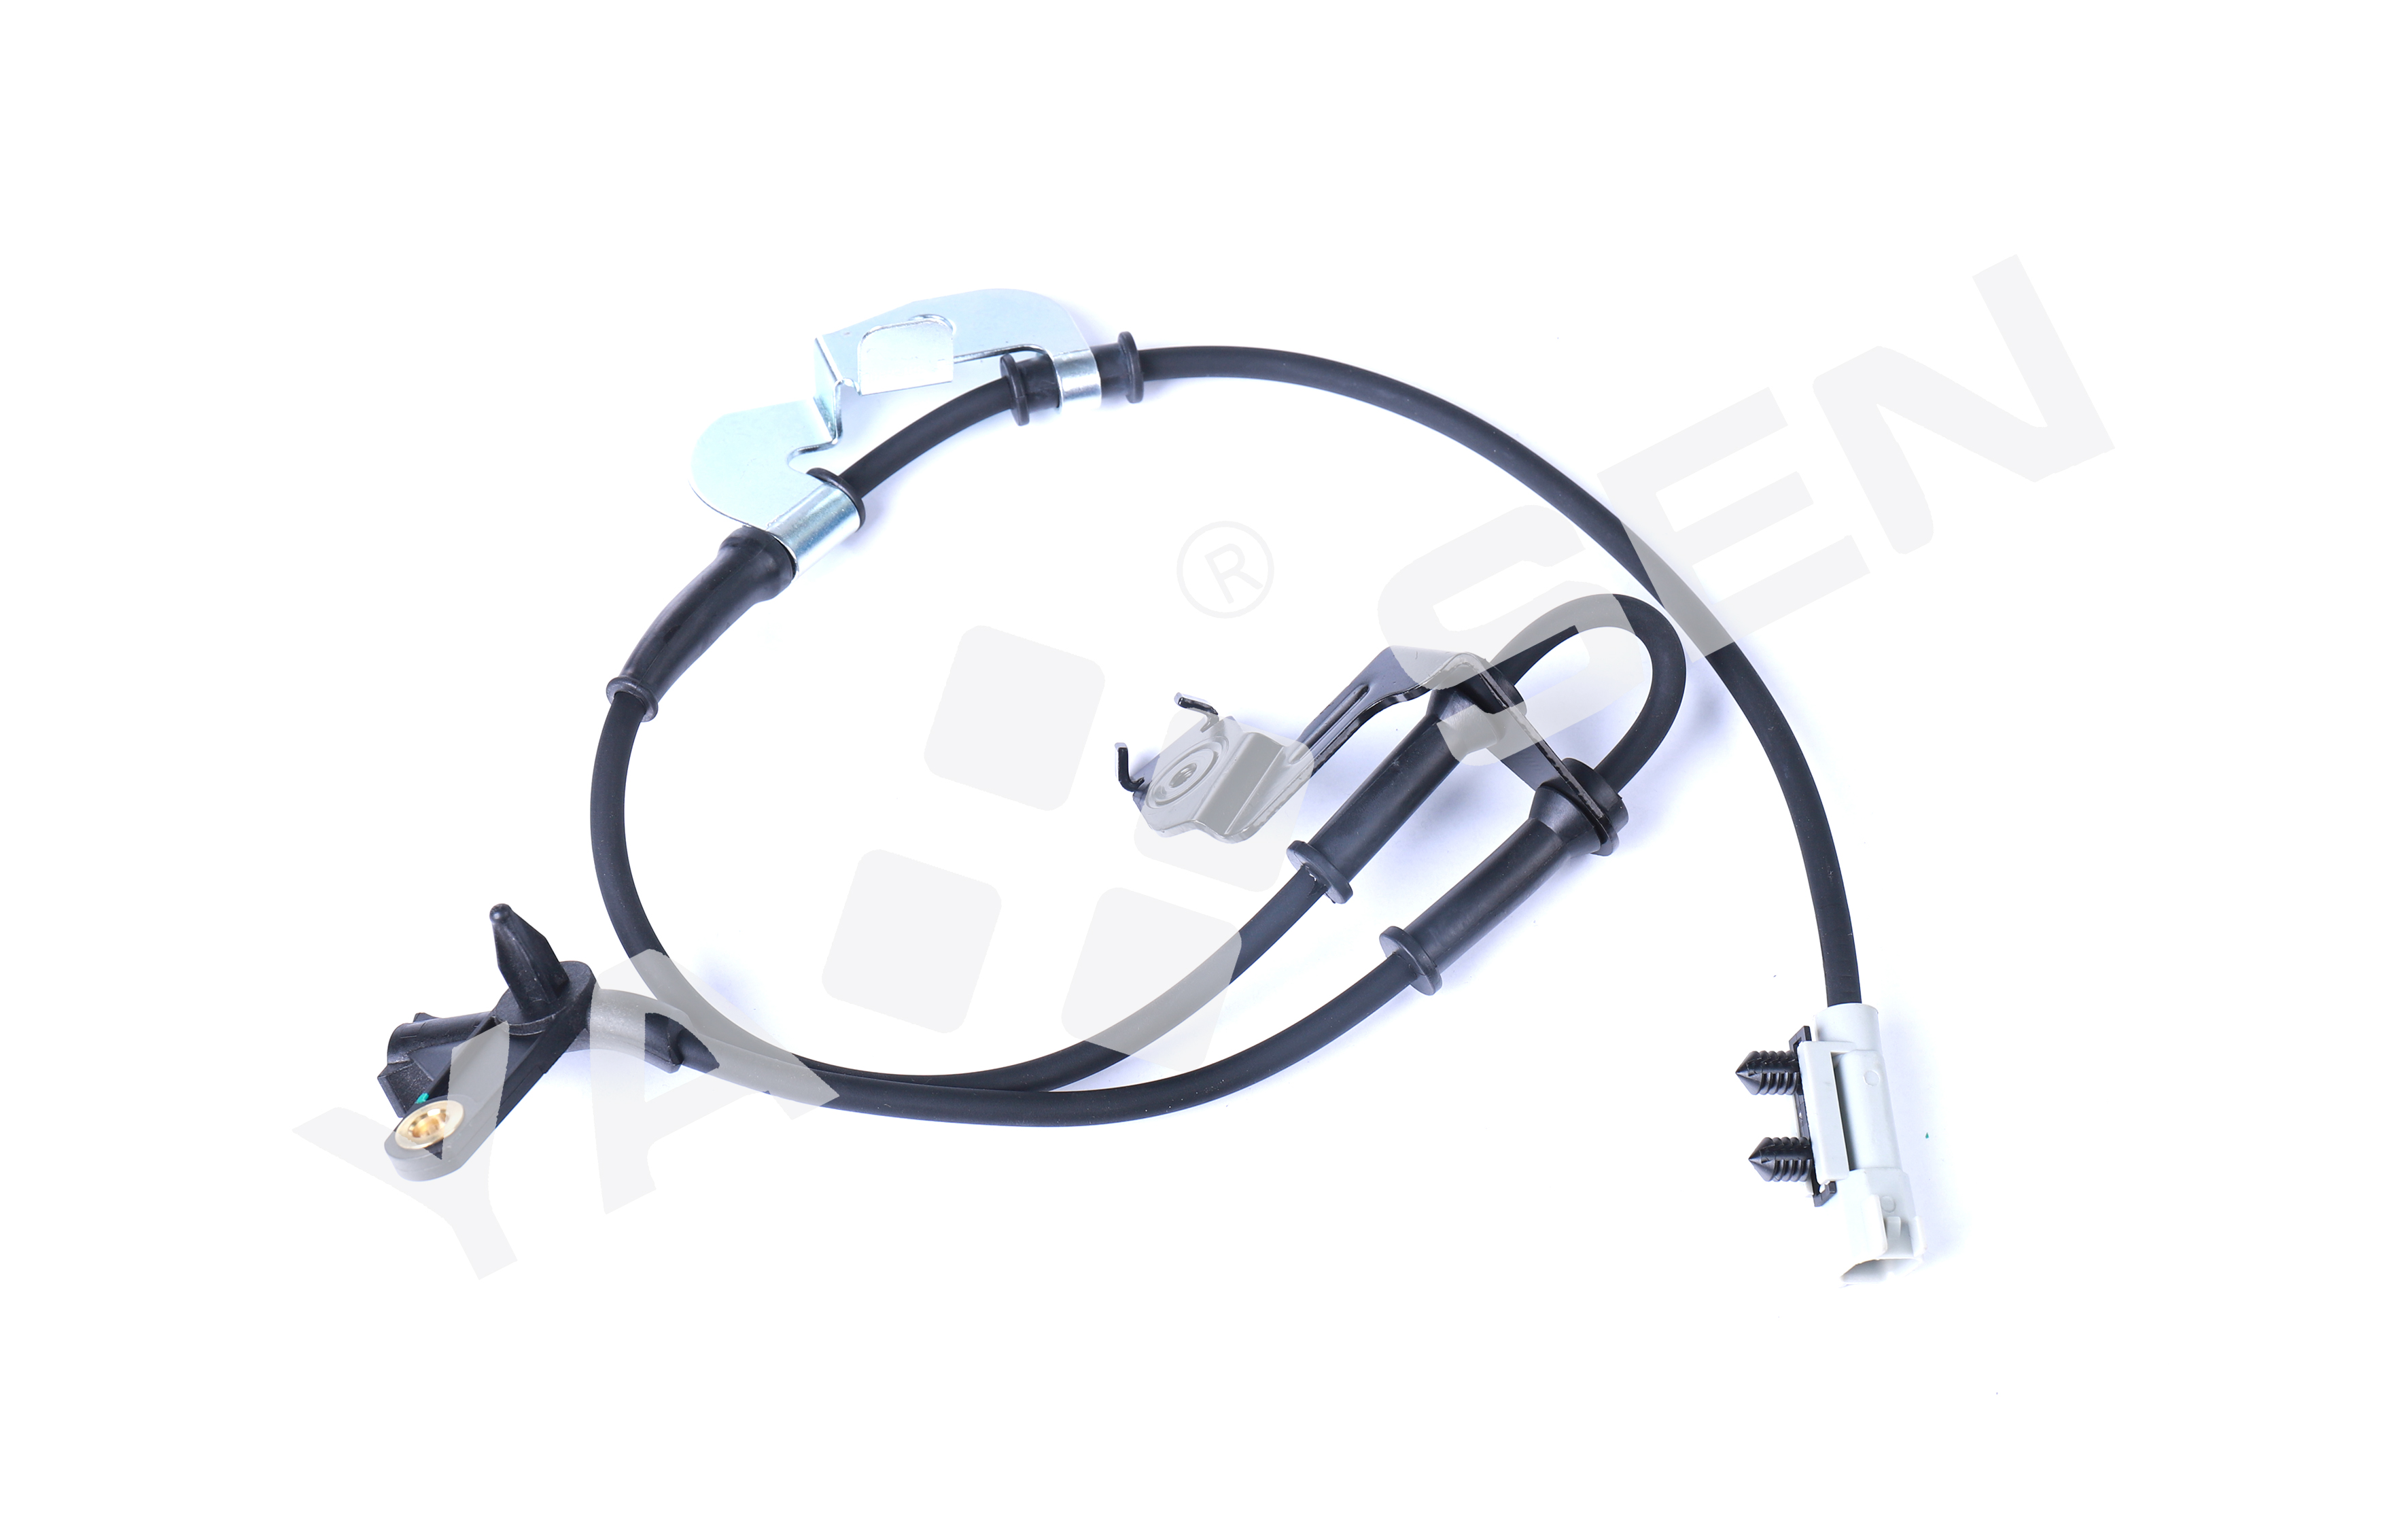 ABS Wheel Speed Sensor for CHEVROLET/FORD, 4683470AD 4683470AA 4683470AC 4683470AB 970026 5S6521 ALS252 5S8475 SU9937